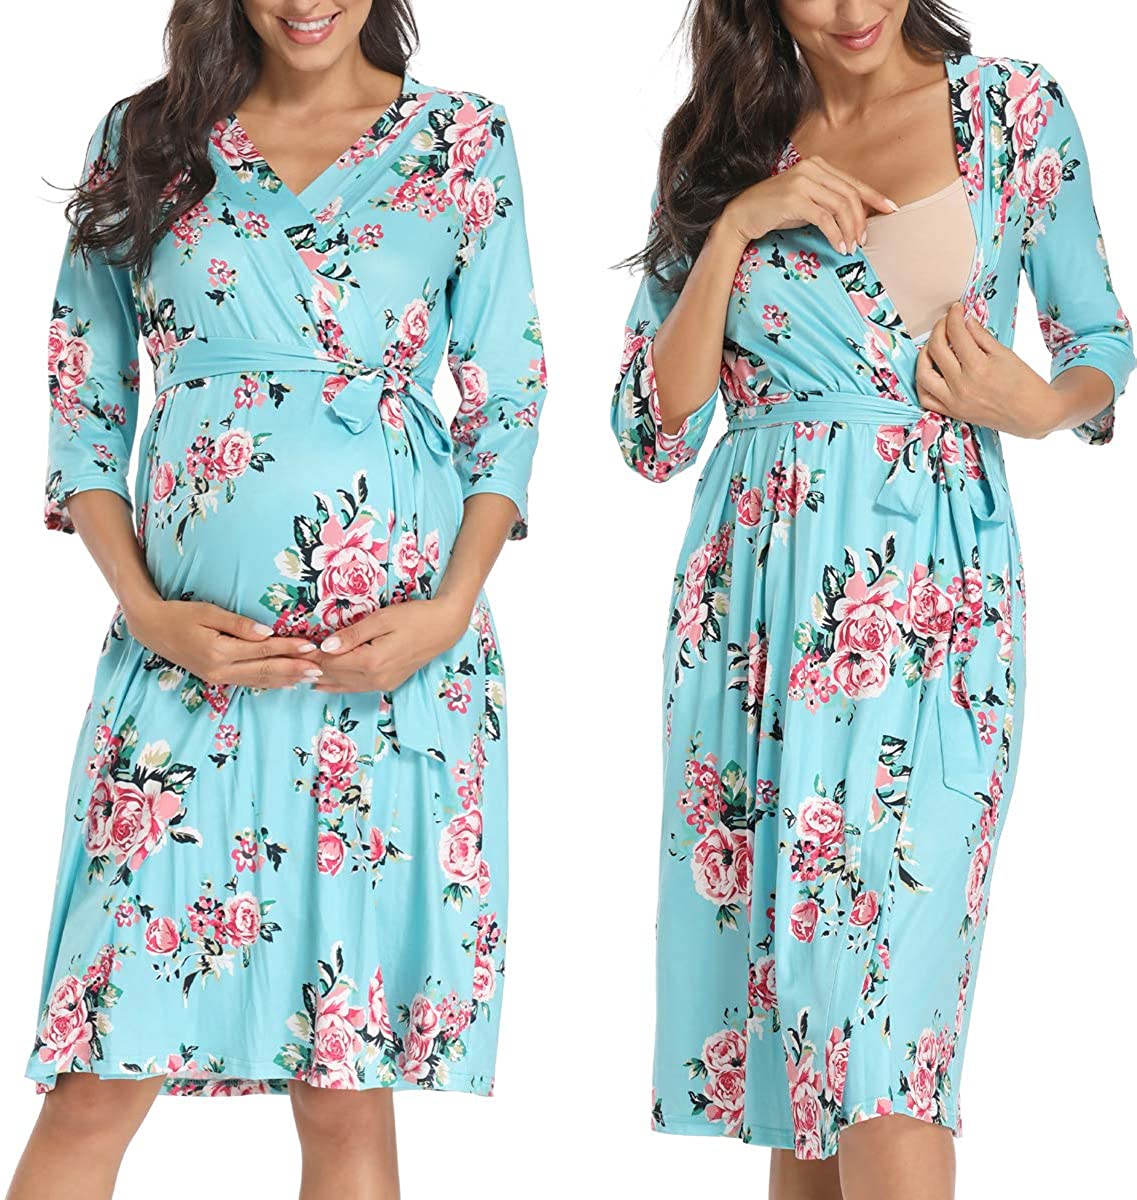 Musidora 3 in 1 Maternity & Nursing Robe with Pockets, Hospital Gown for  Labor a